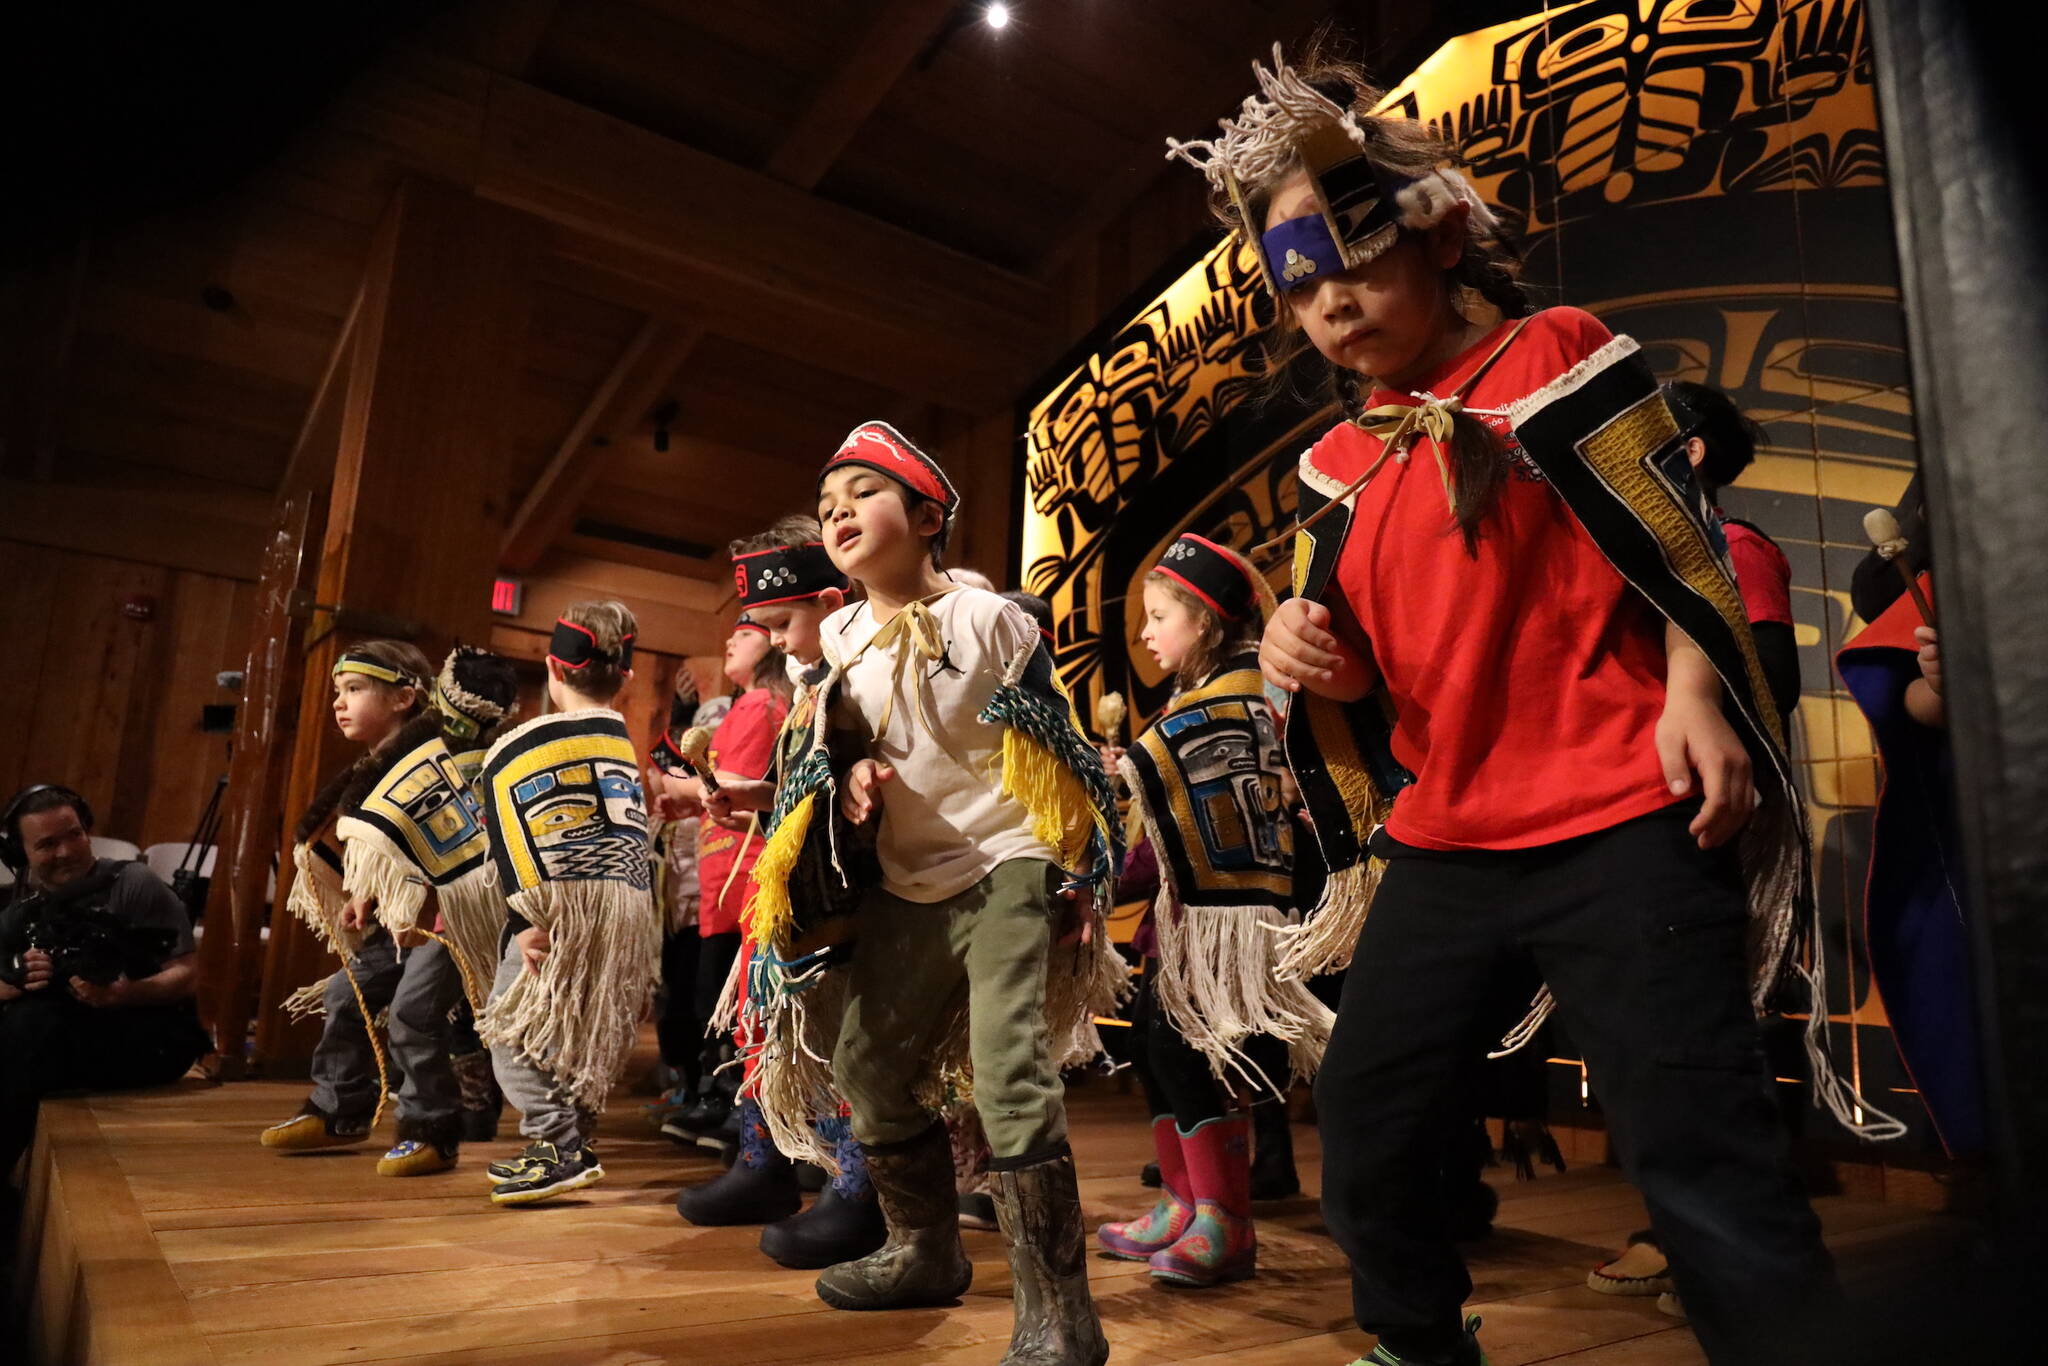 Young students from the Tlingit Culture Language and Literacy program at Harborview Elementary School dance on stage Wednesday afternoon during a dancing-of-the-robes ceremony for over a dozen Chilkat robes that were weaved by student weavers who participated in a more than two-year-long apprenticeship to learn the craft. (Clarise Larson / Juneau Empire)